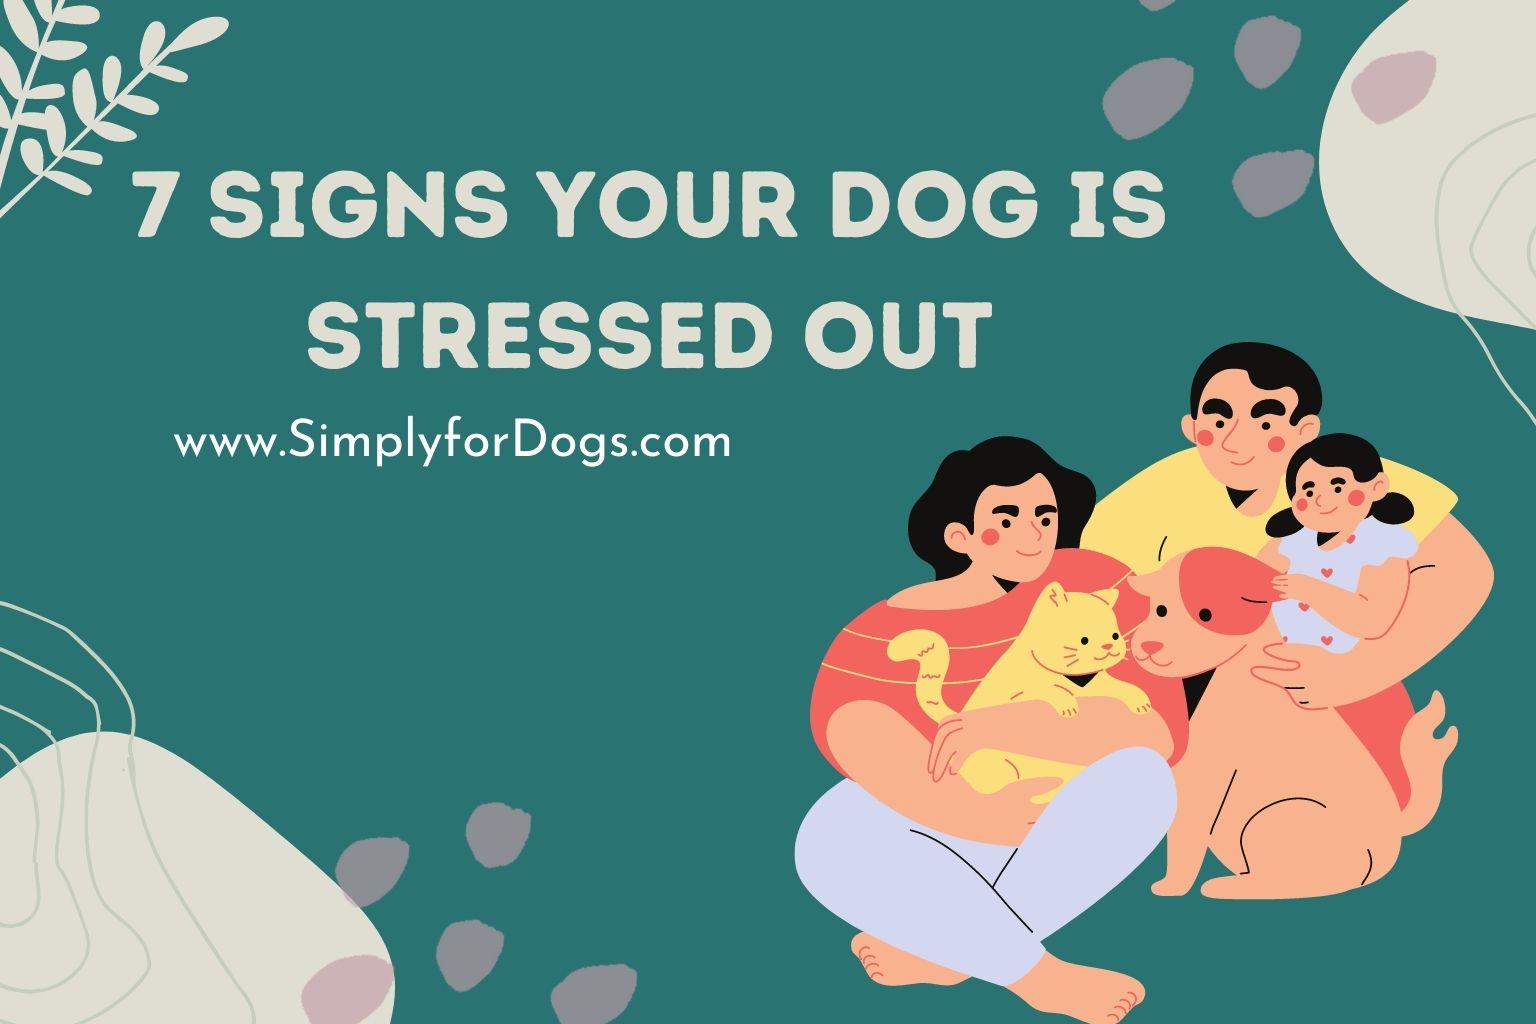 7 Signs Your Dog is Stressed Out